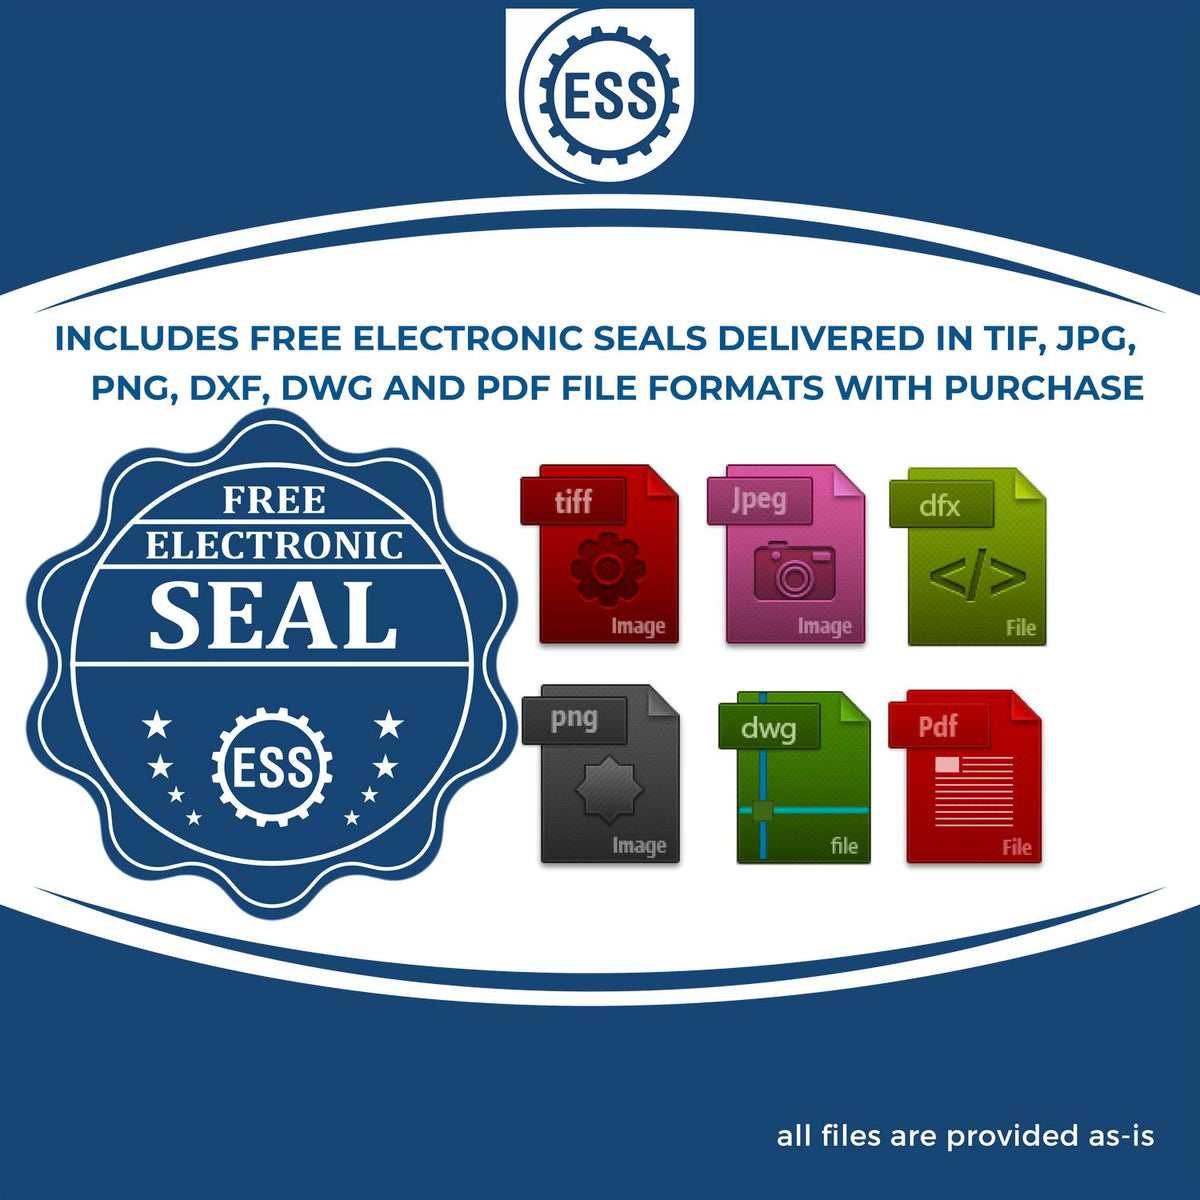 An infographic for the free electronic seal for the Hybrid Delaware Engineer Seal illustrating the different file type icons such as DXF, DWG, TIF, JPG and PNG.